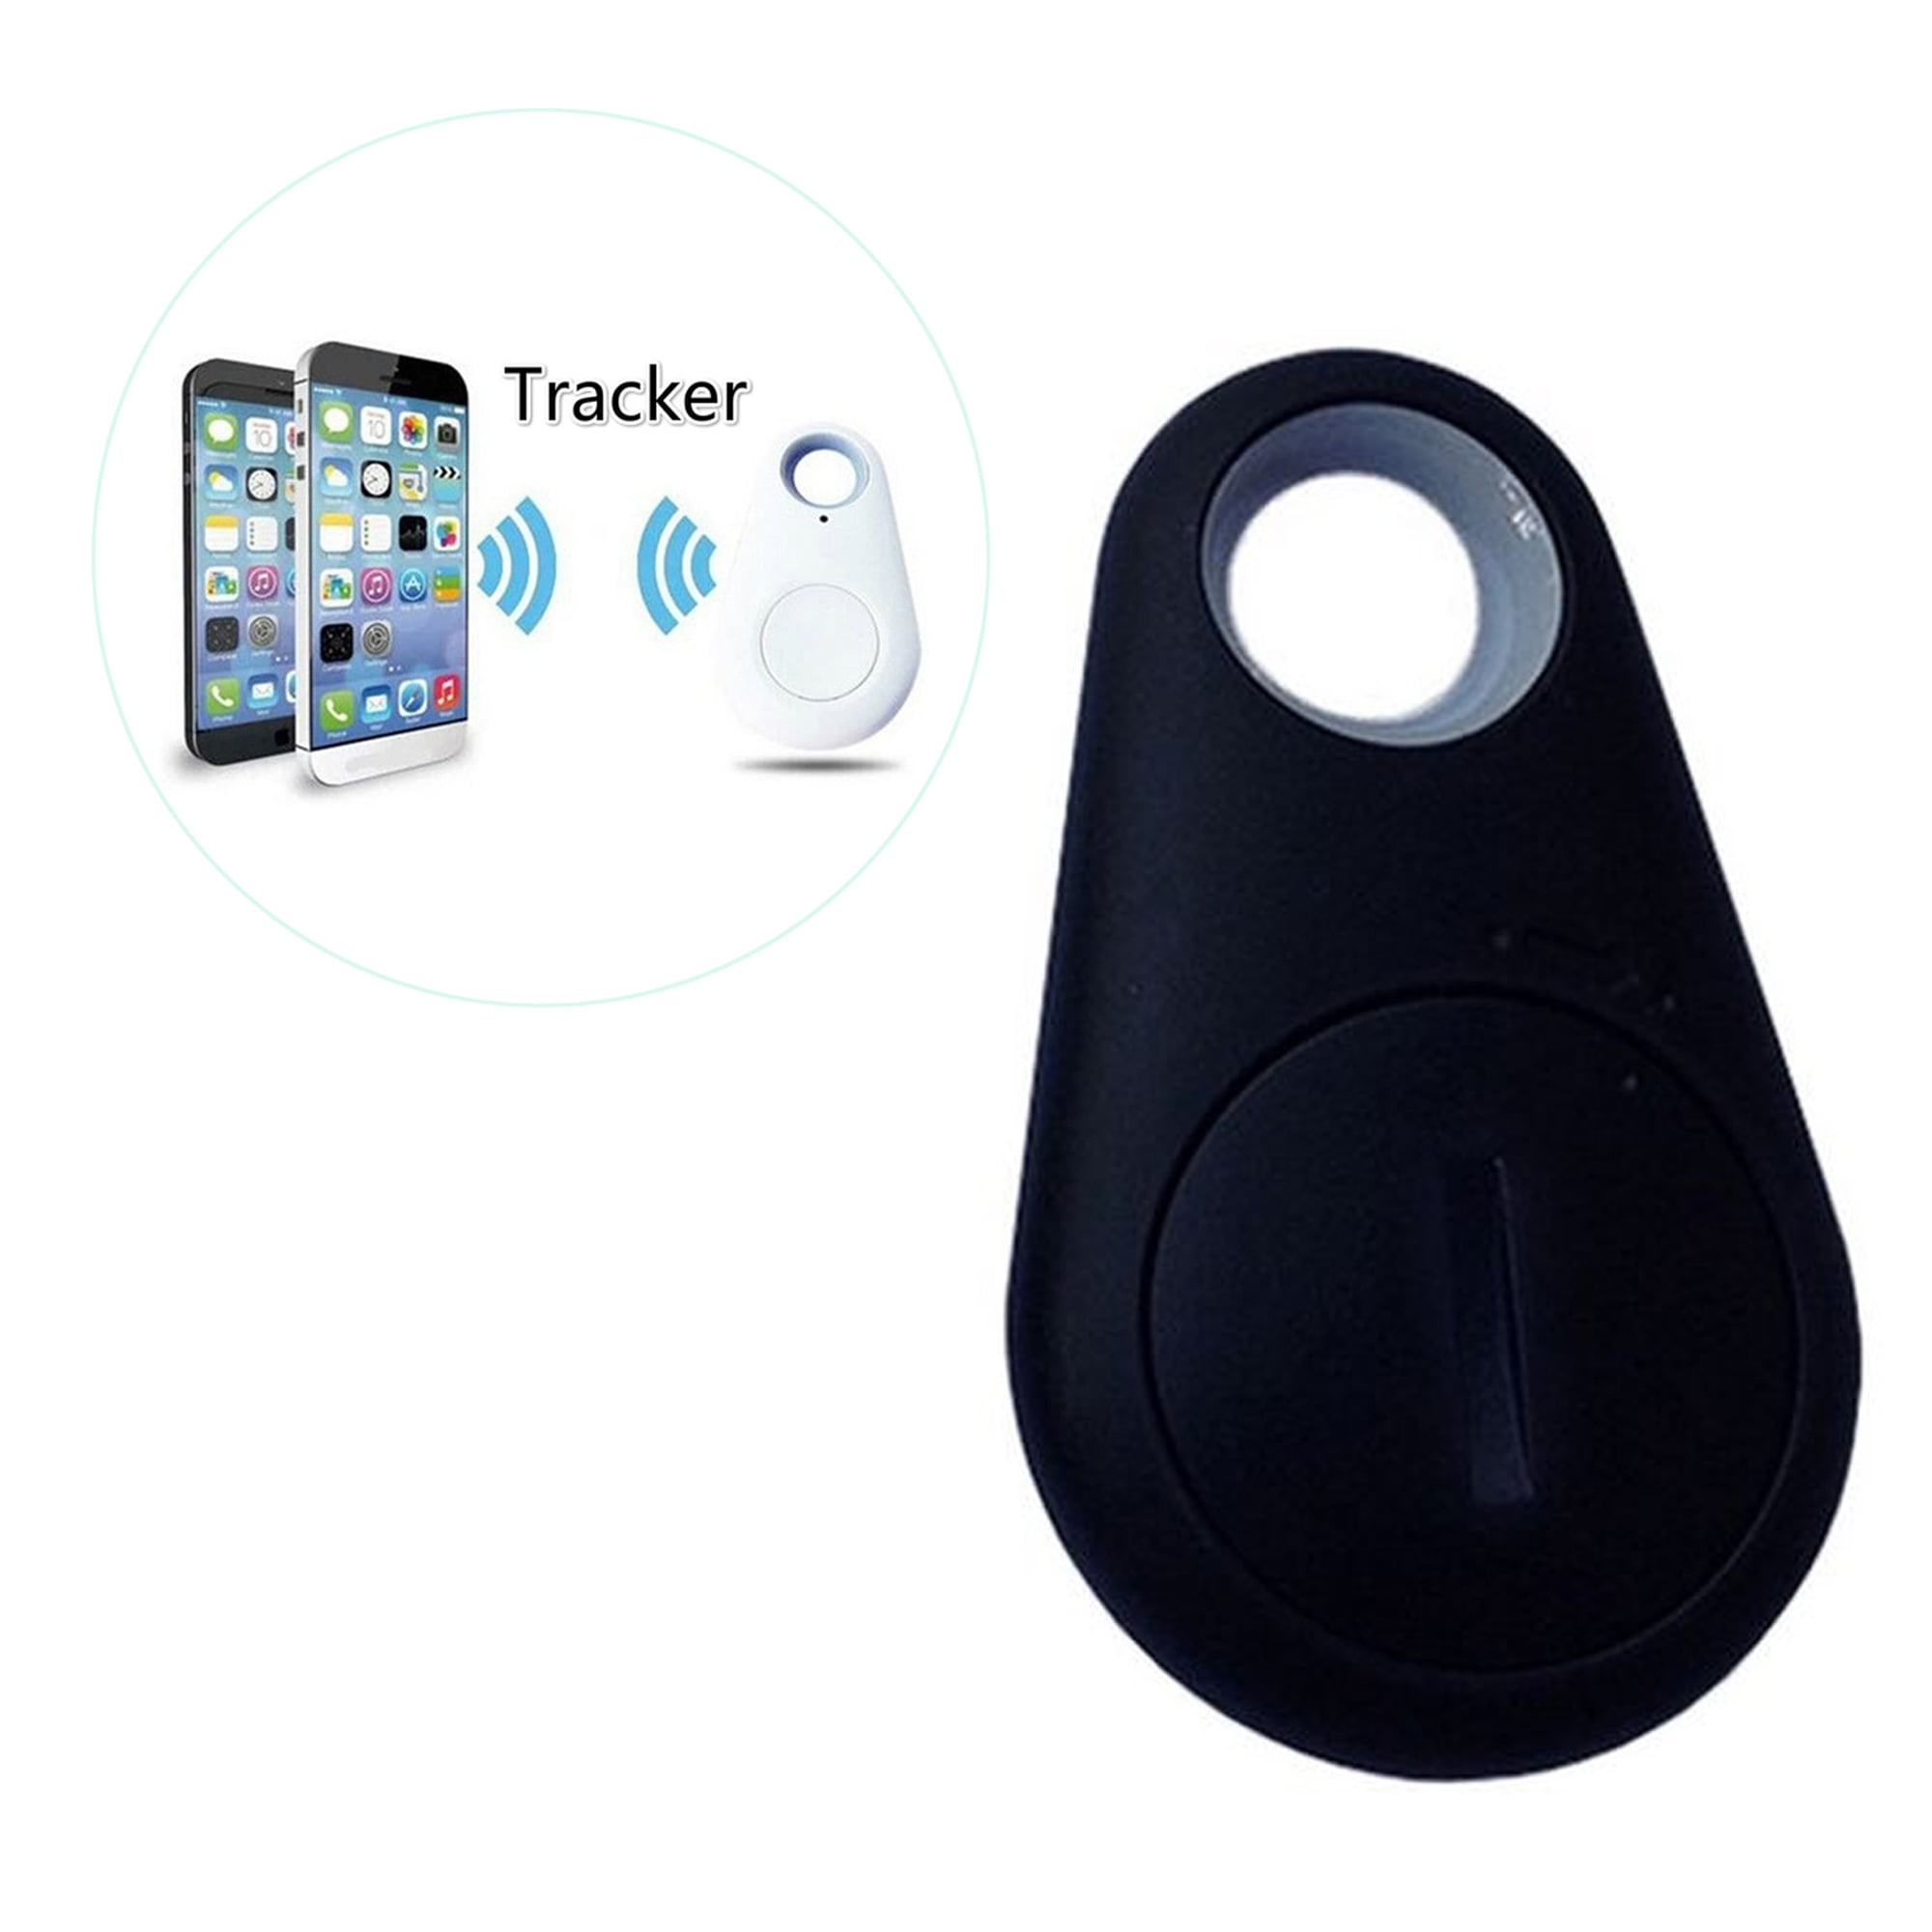 New Spy Mini GPS Tracking Finder Device Auto Car Pets Kids Motorcycle BSG 